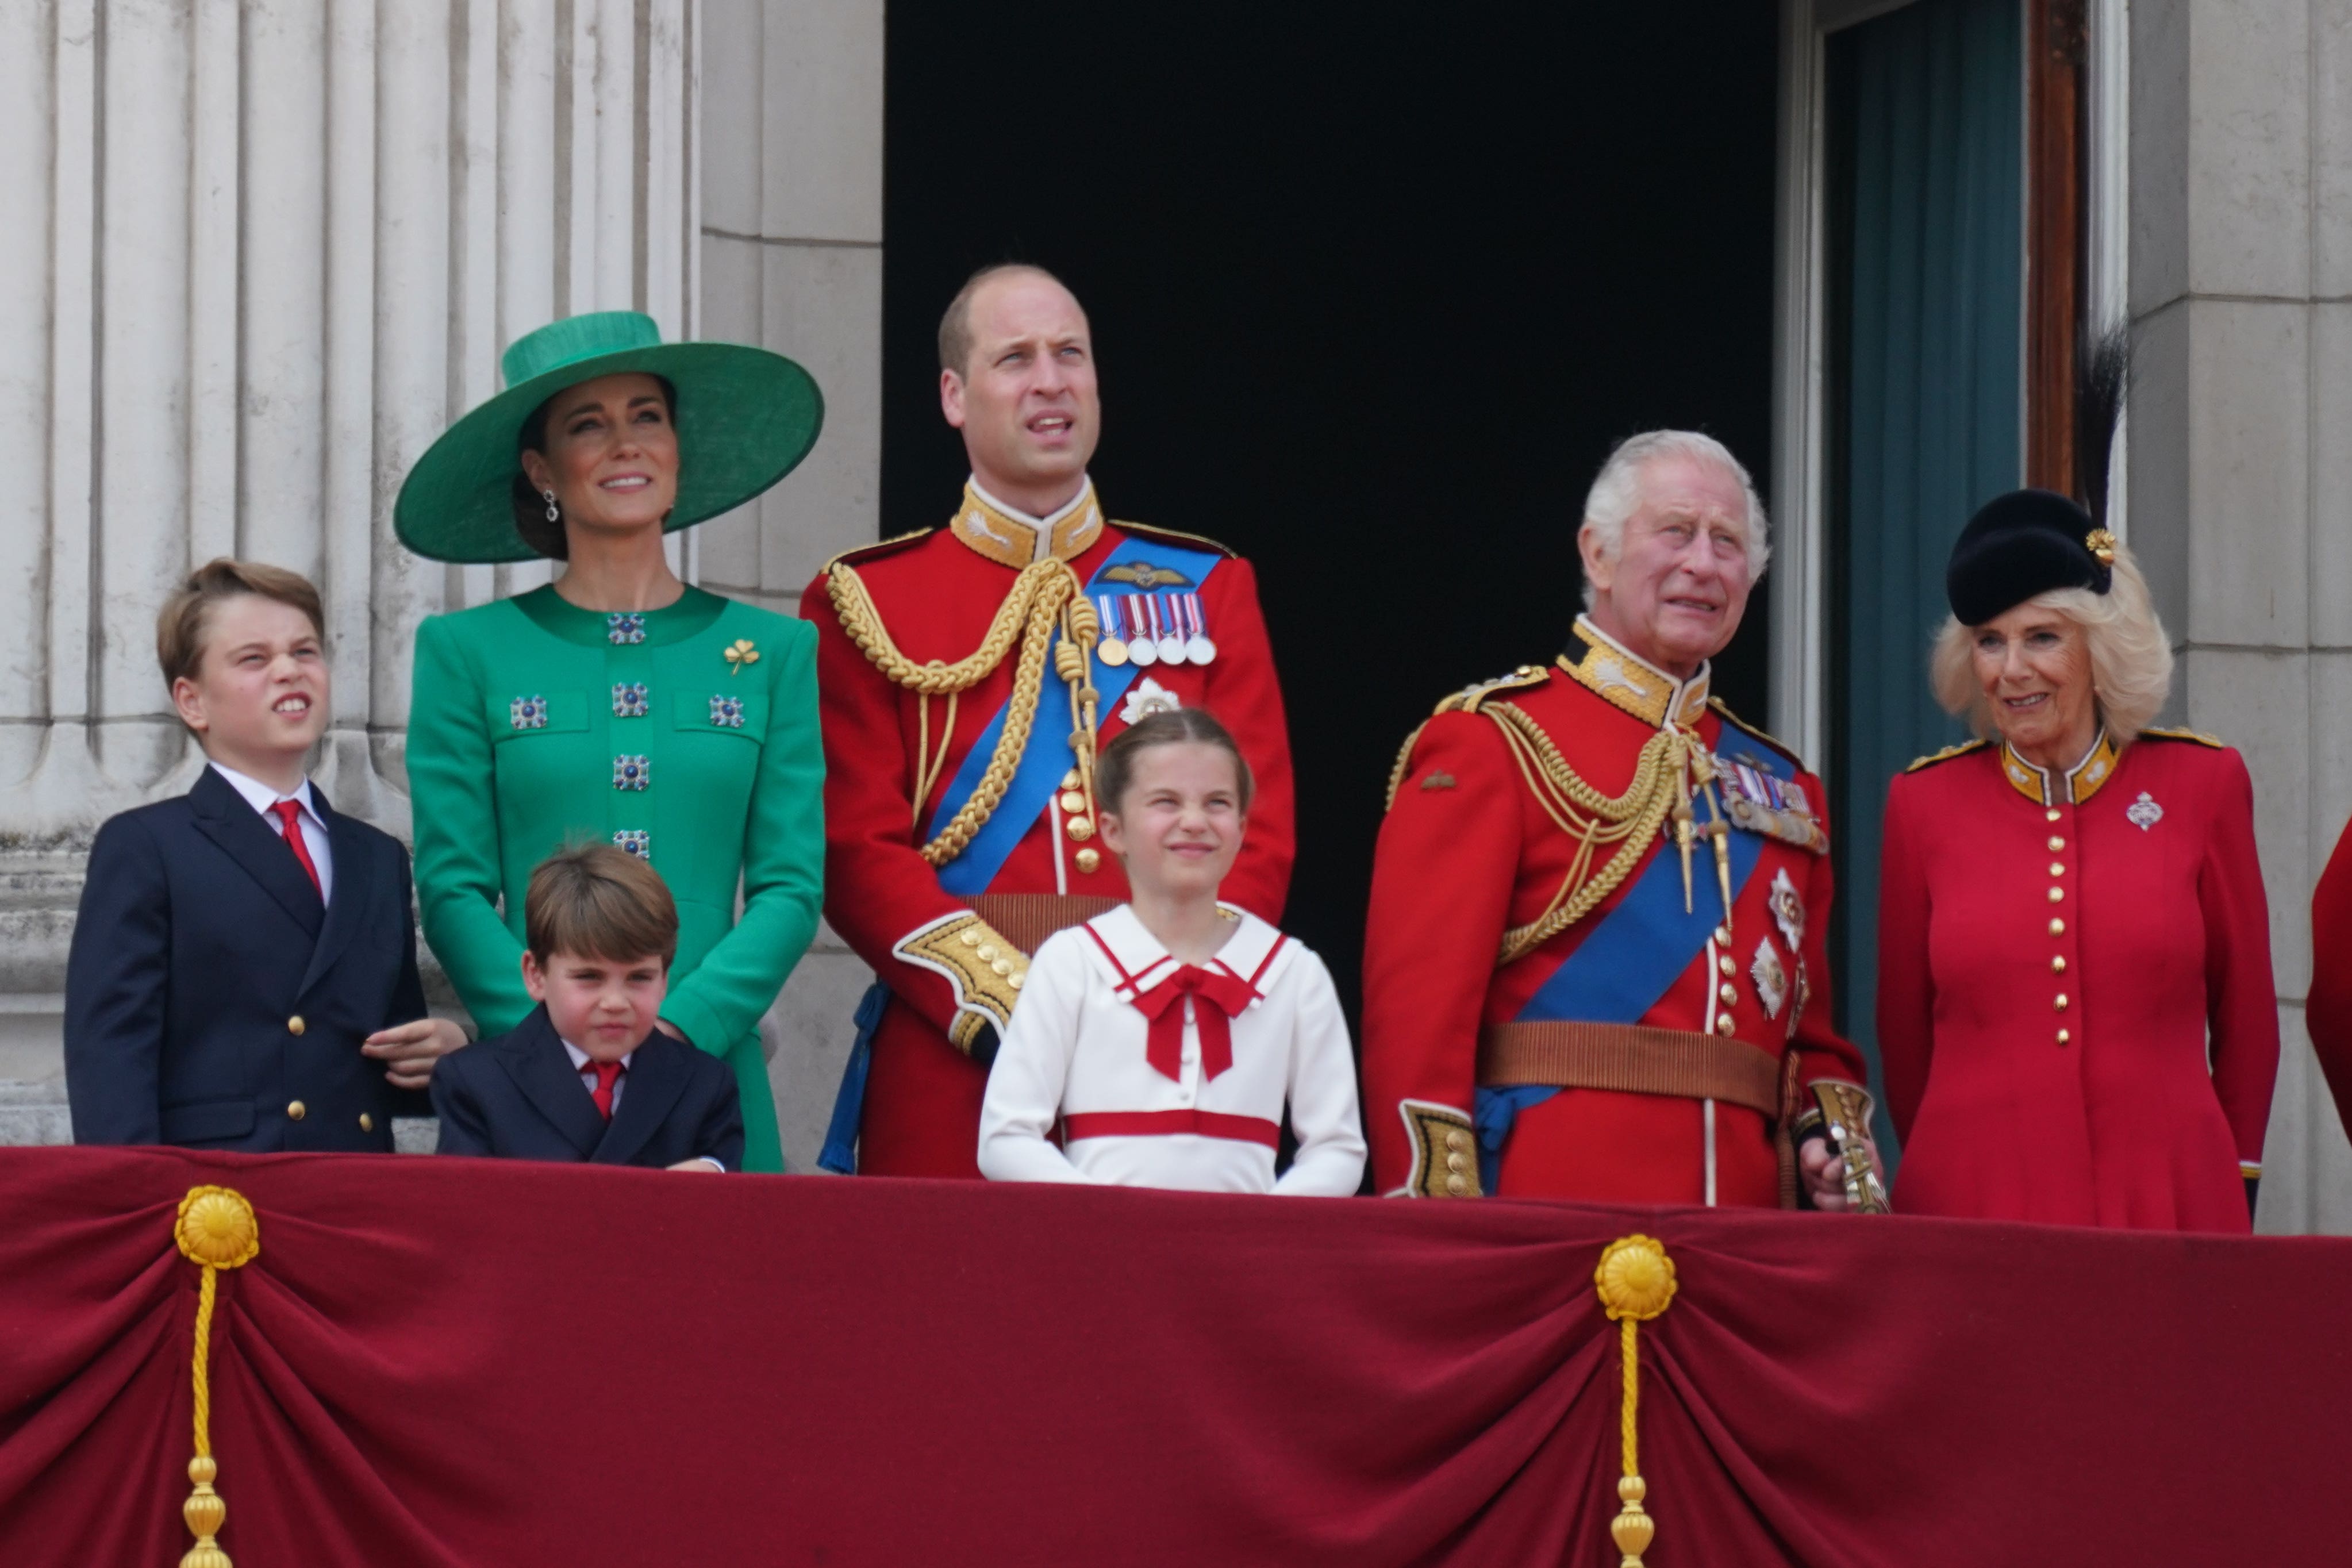 Prince George, the Princess of Wales, Prince Louis, the Prince of Wales, Princess Charlotte, King Charles and Queen Camilla on the balcony of Buckingham Palace